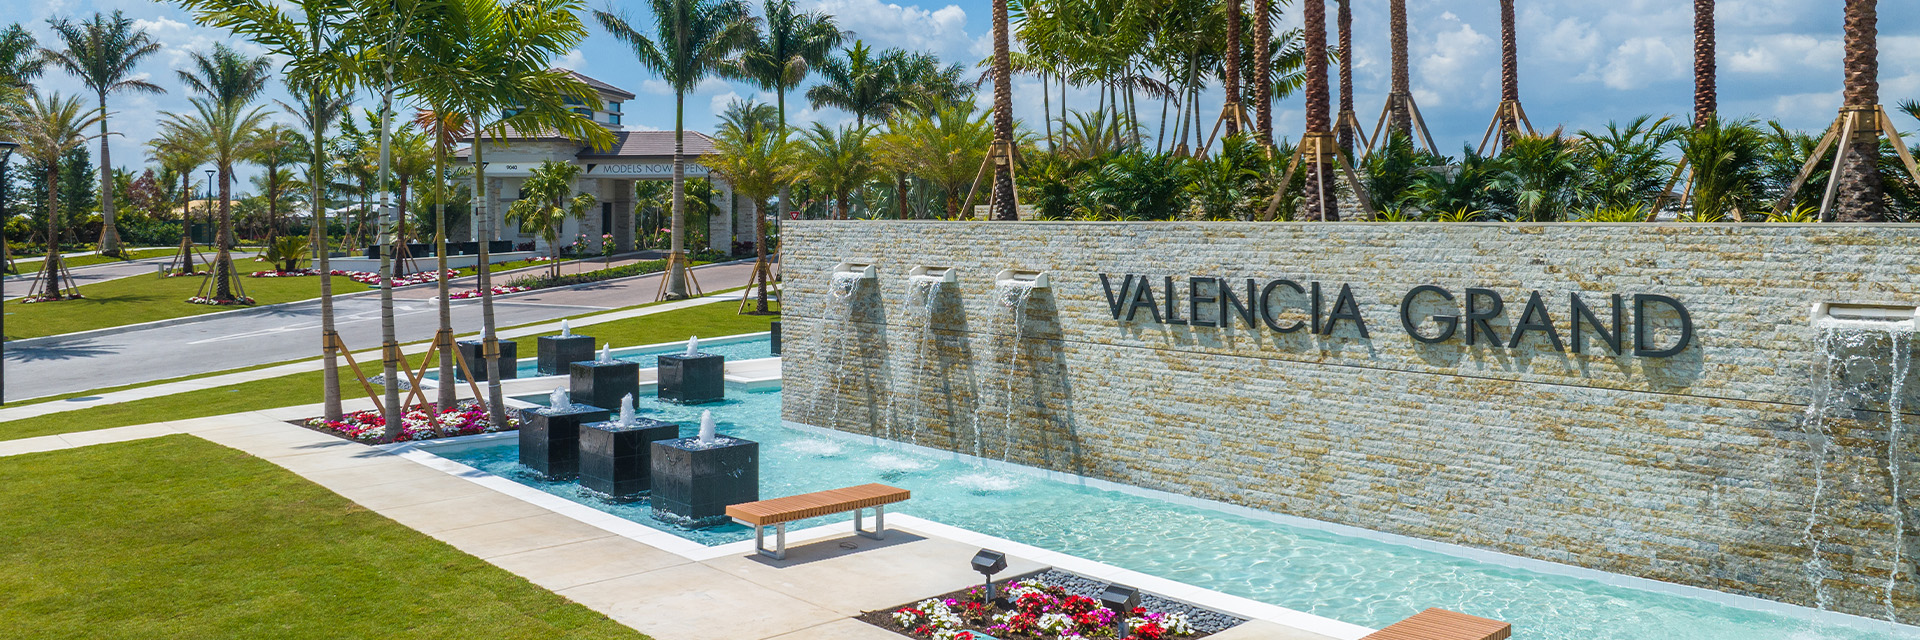 Valencia Grand water feature entrance